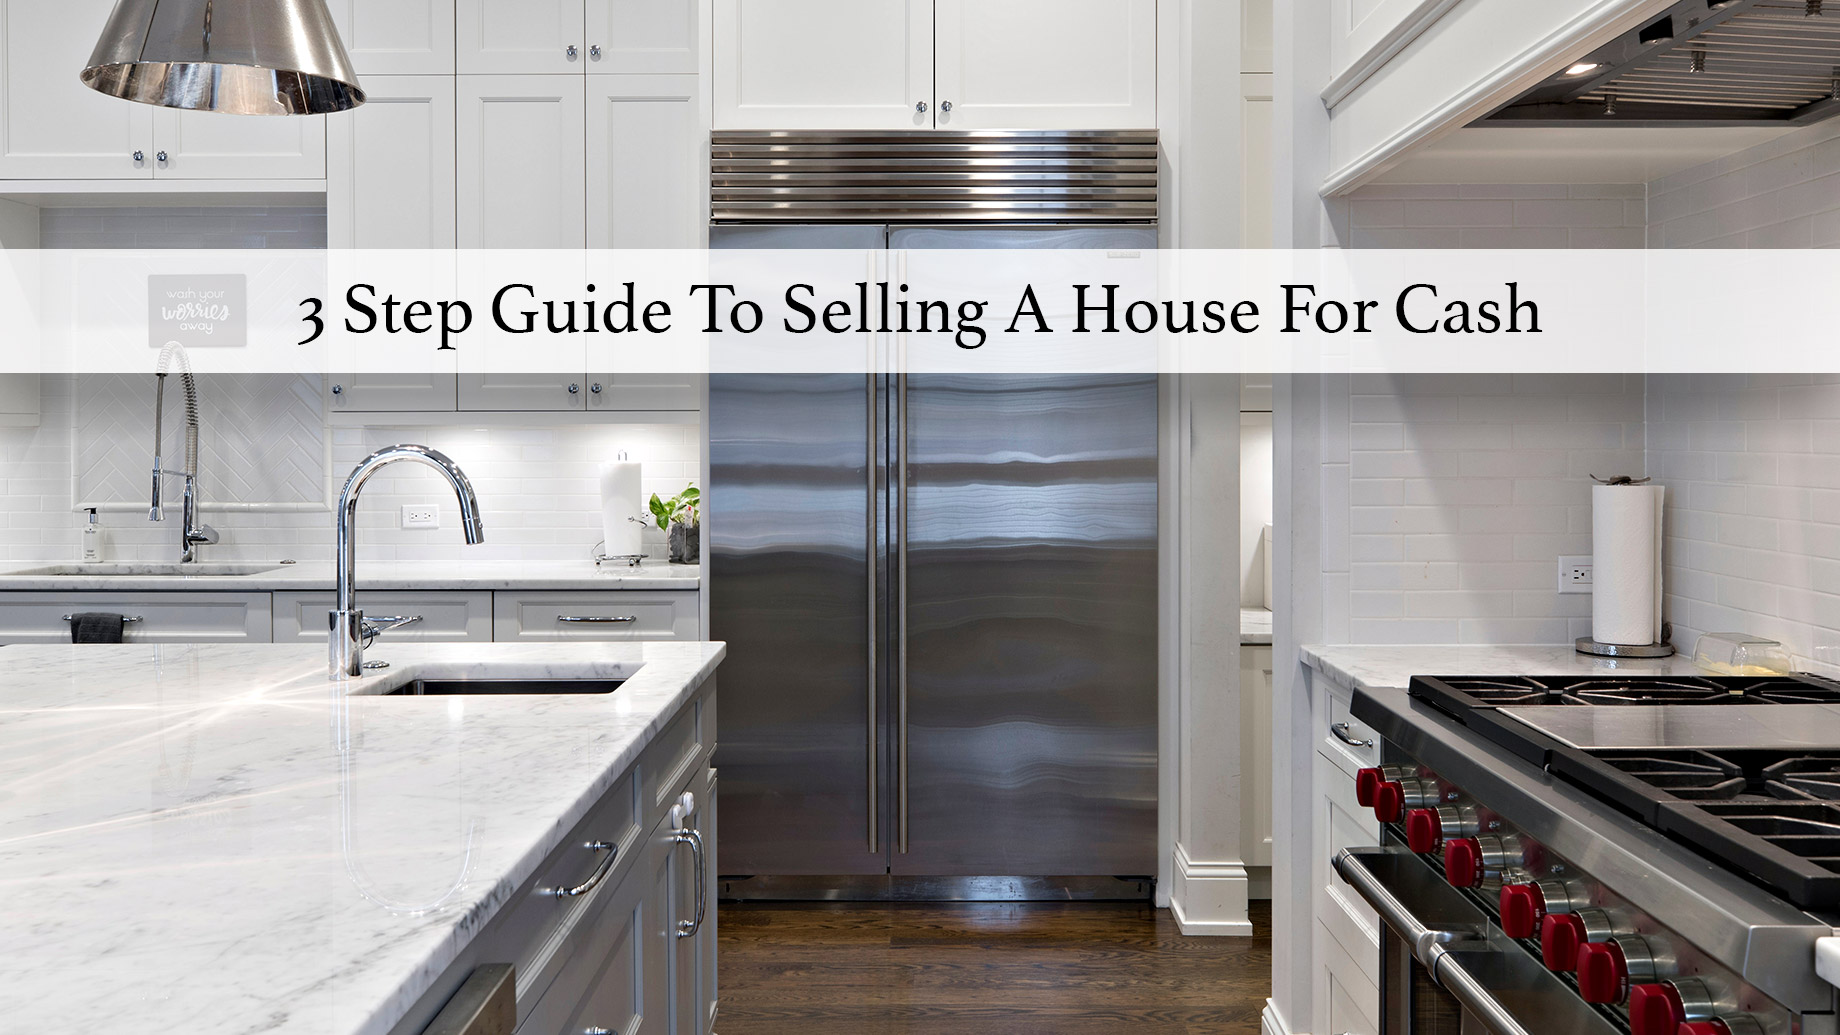 3 Step Guide To Selling A House For Cash